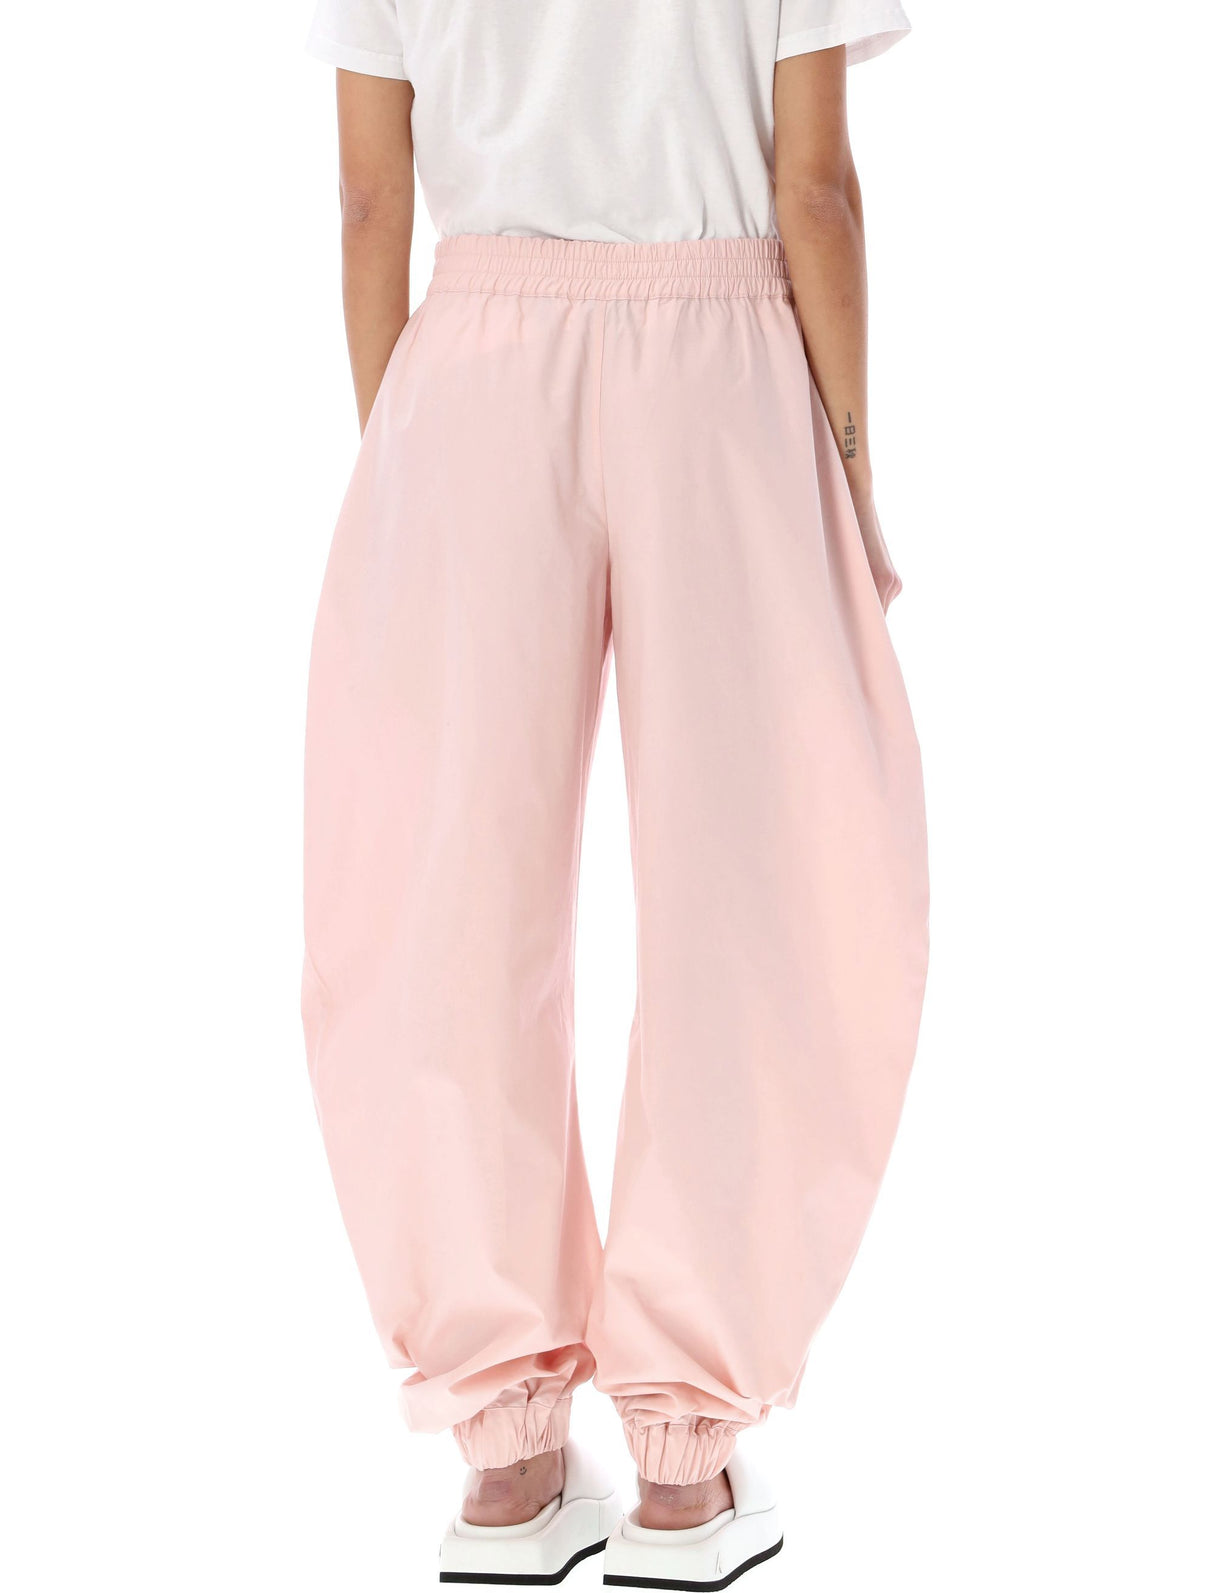 Banana Jogging Pants for Women - SS24 Collection